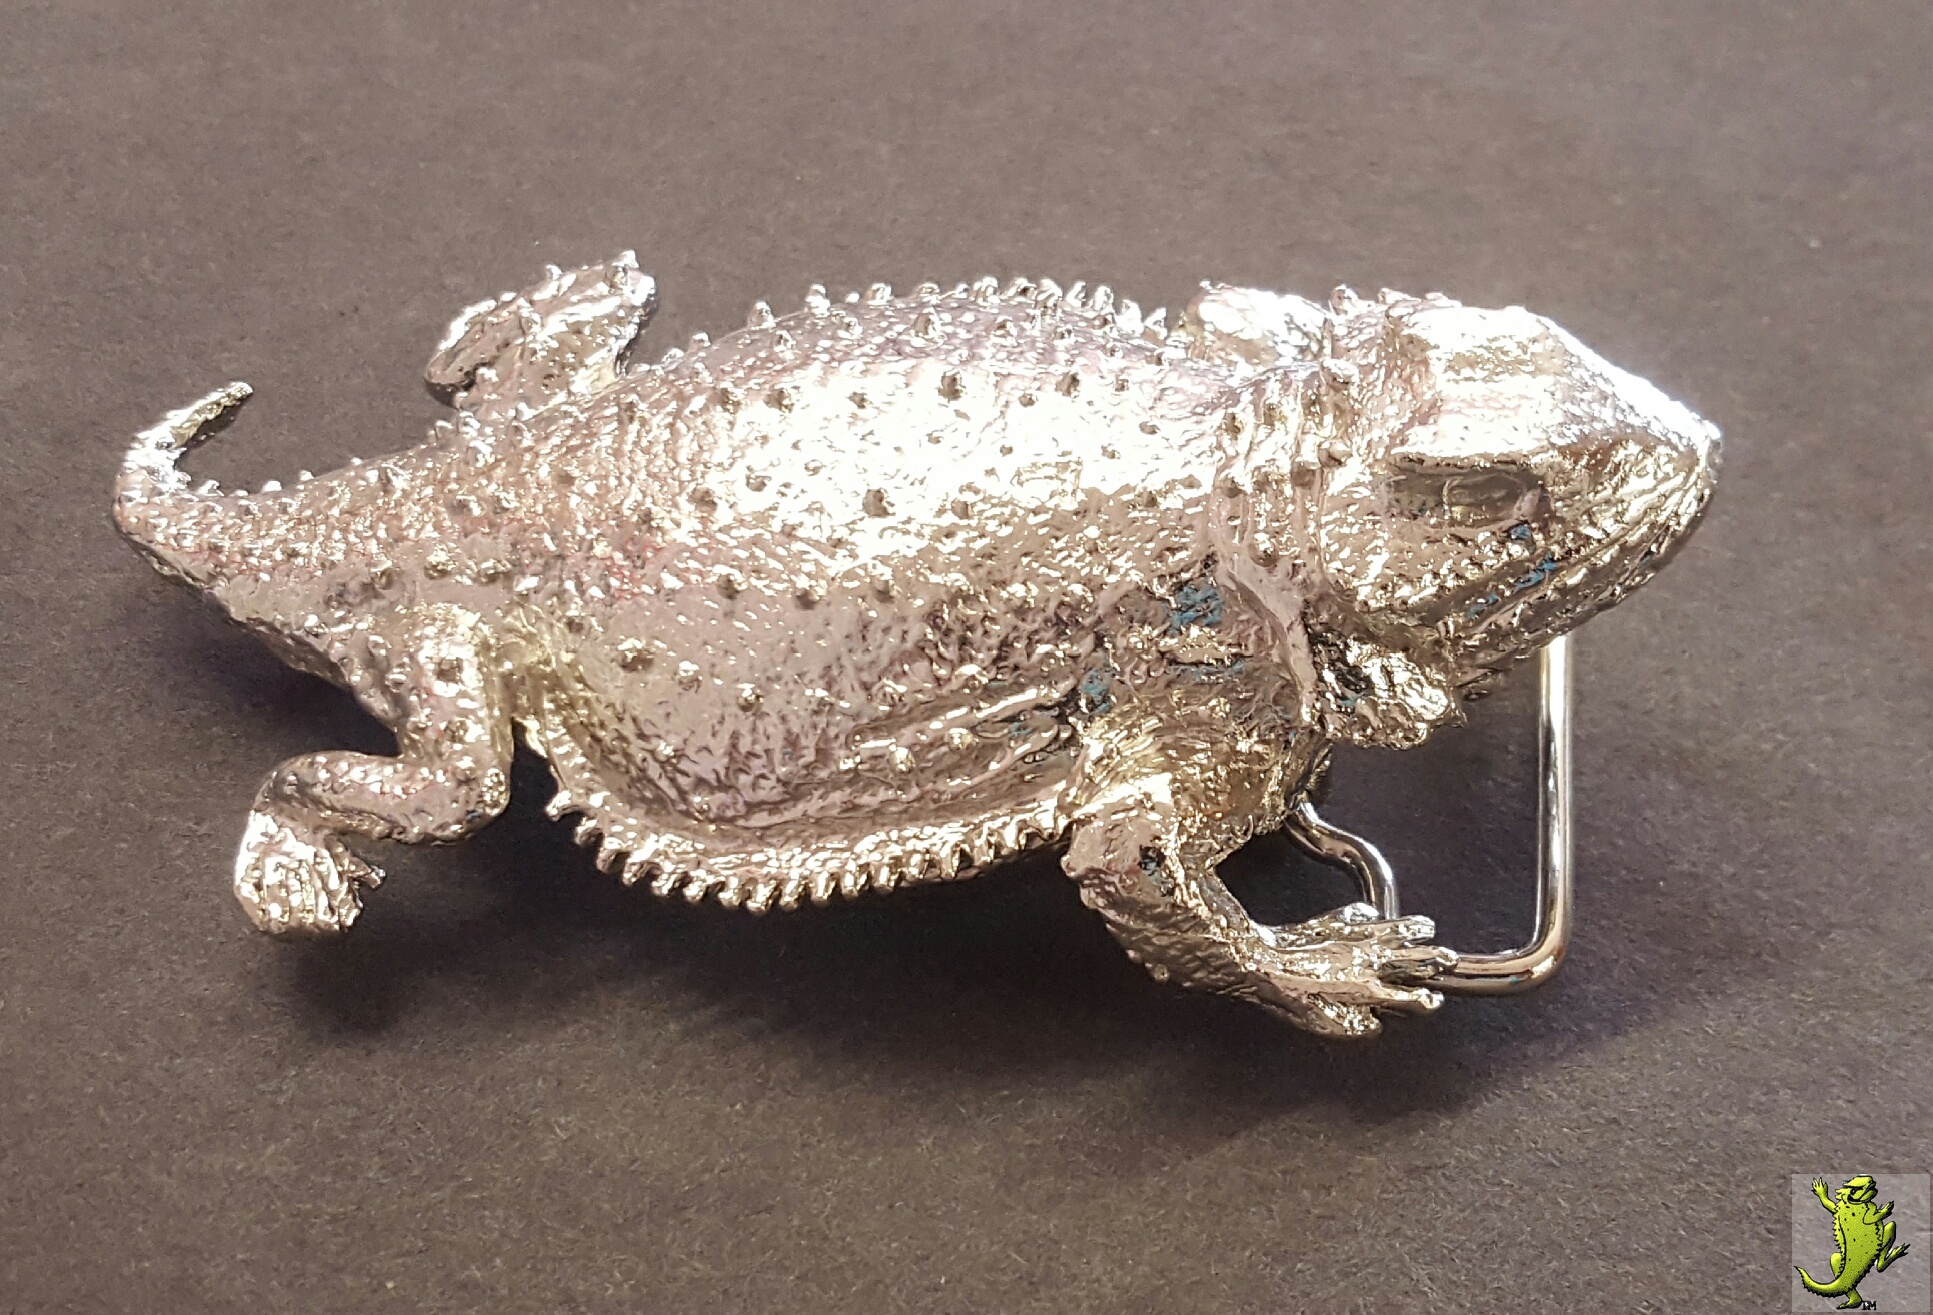 Horny Toad Large Belt Buckle - 4.5"